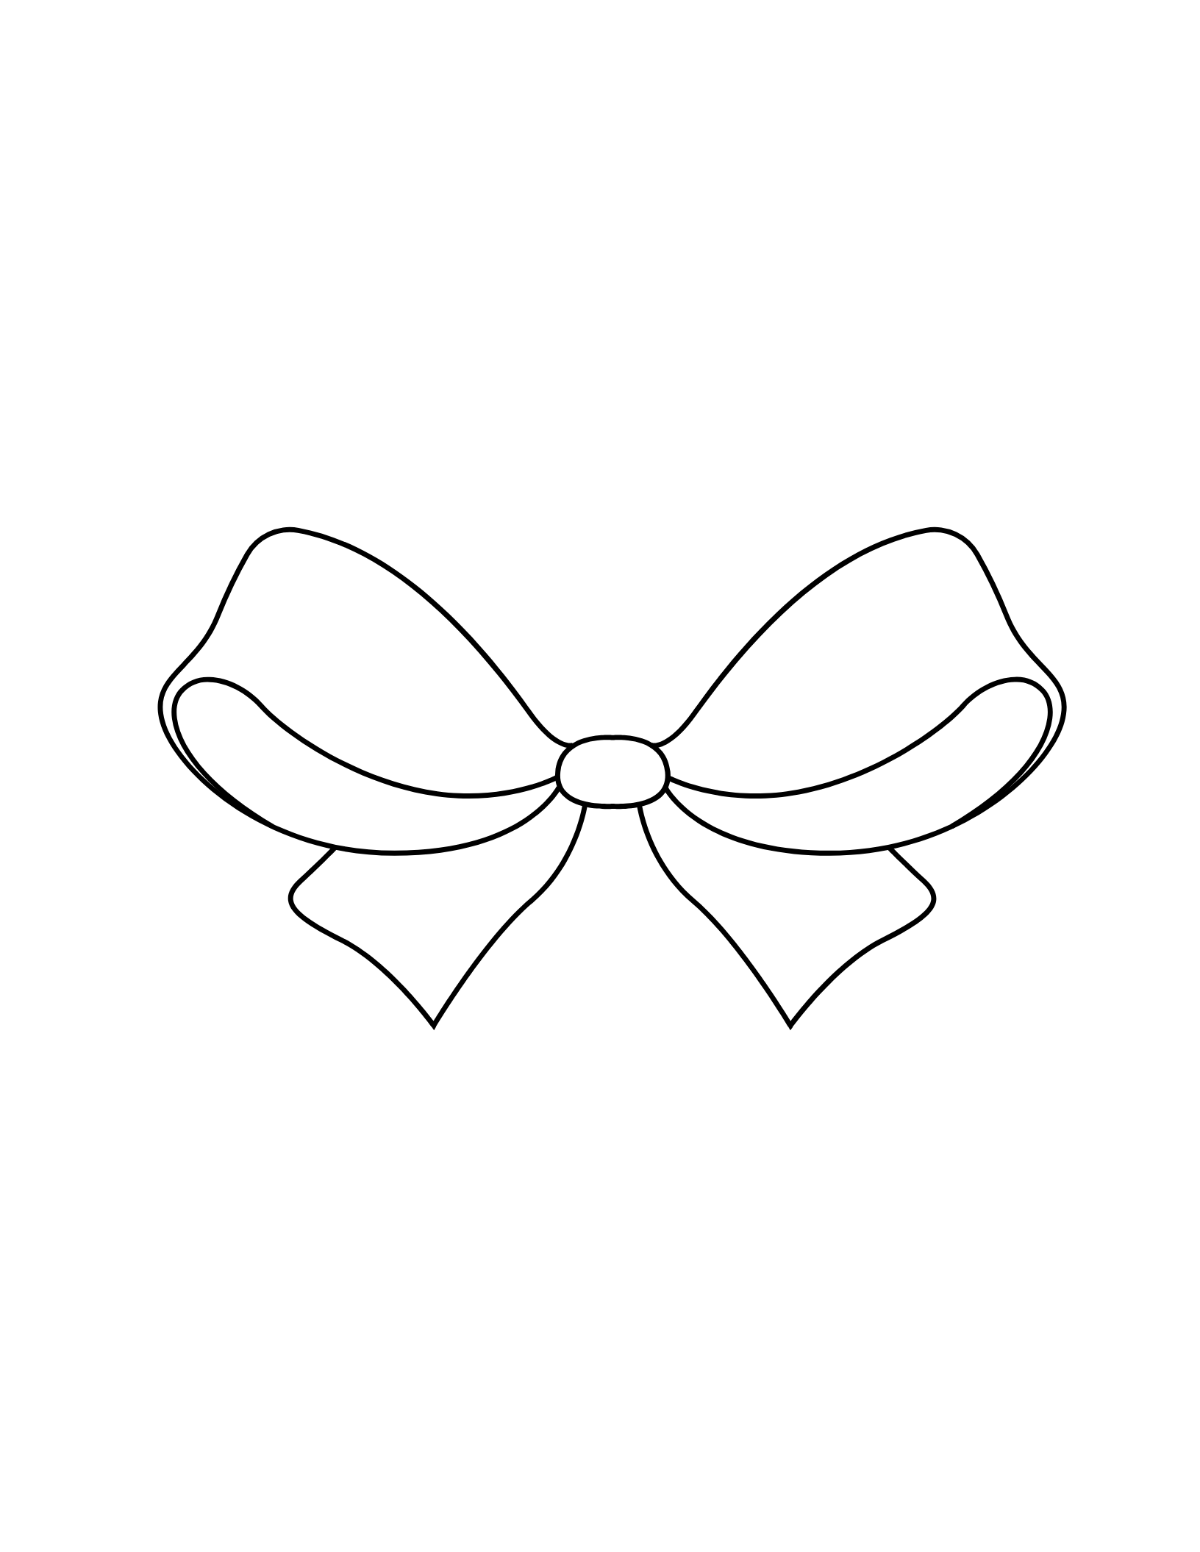 Wedding Knot Coloring Page Template